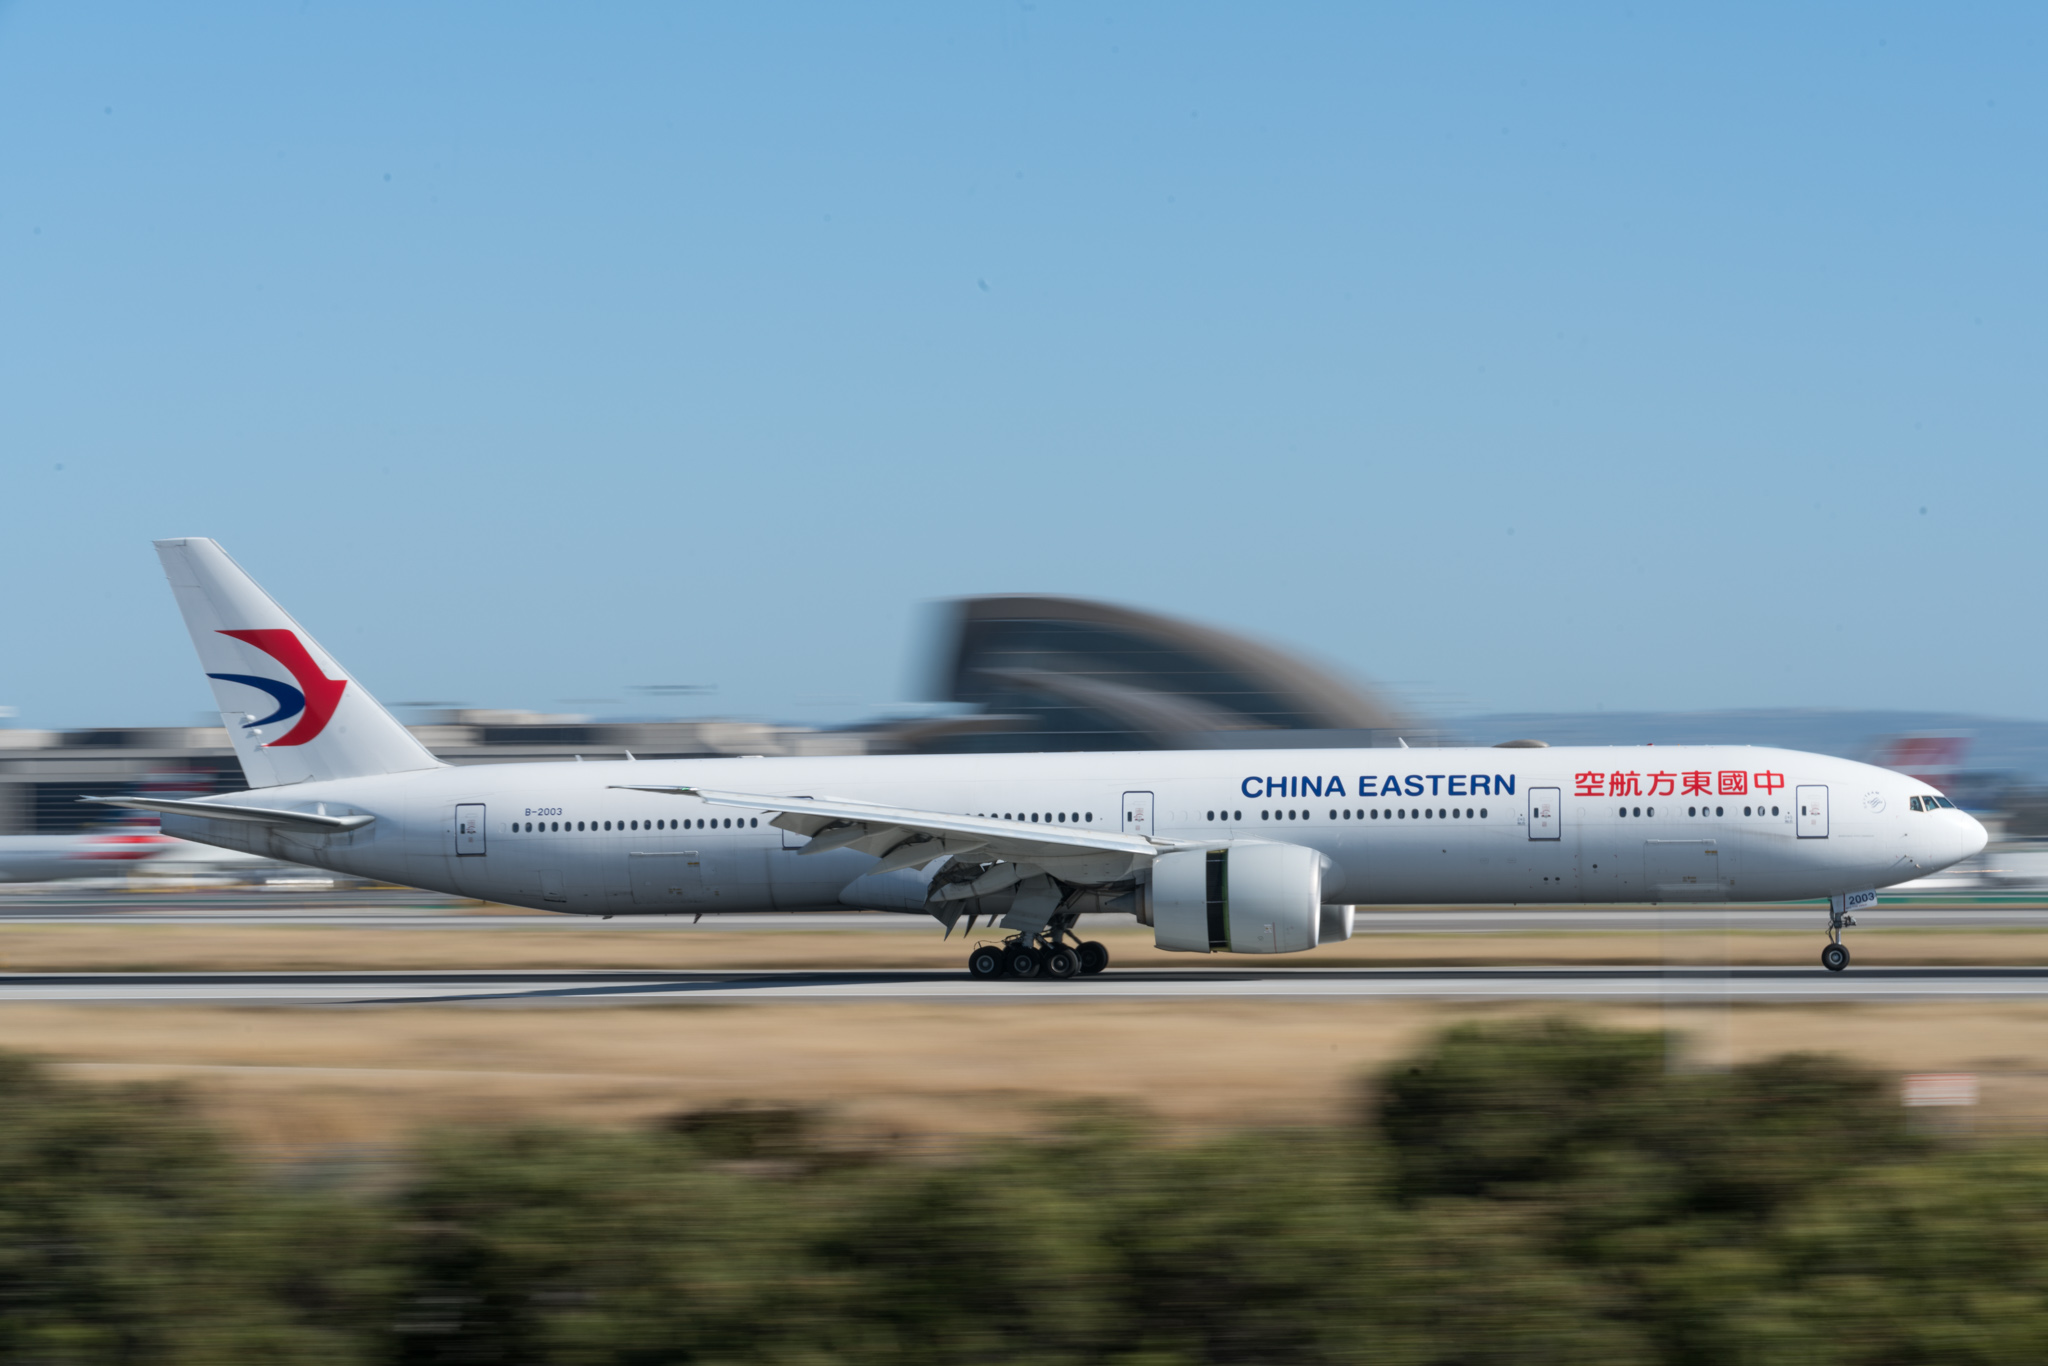 a white airplane on a runway